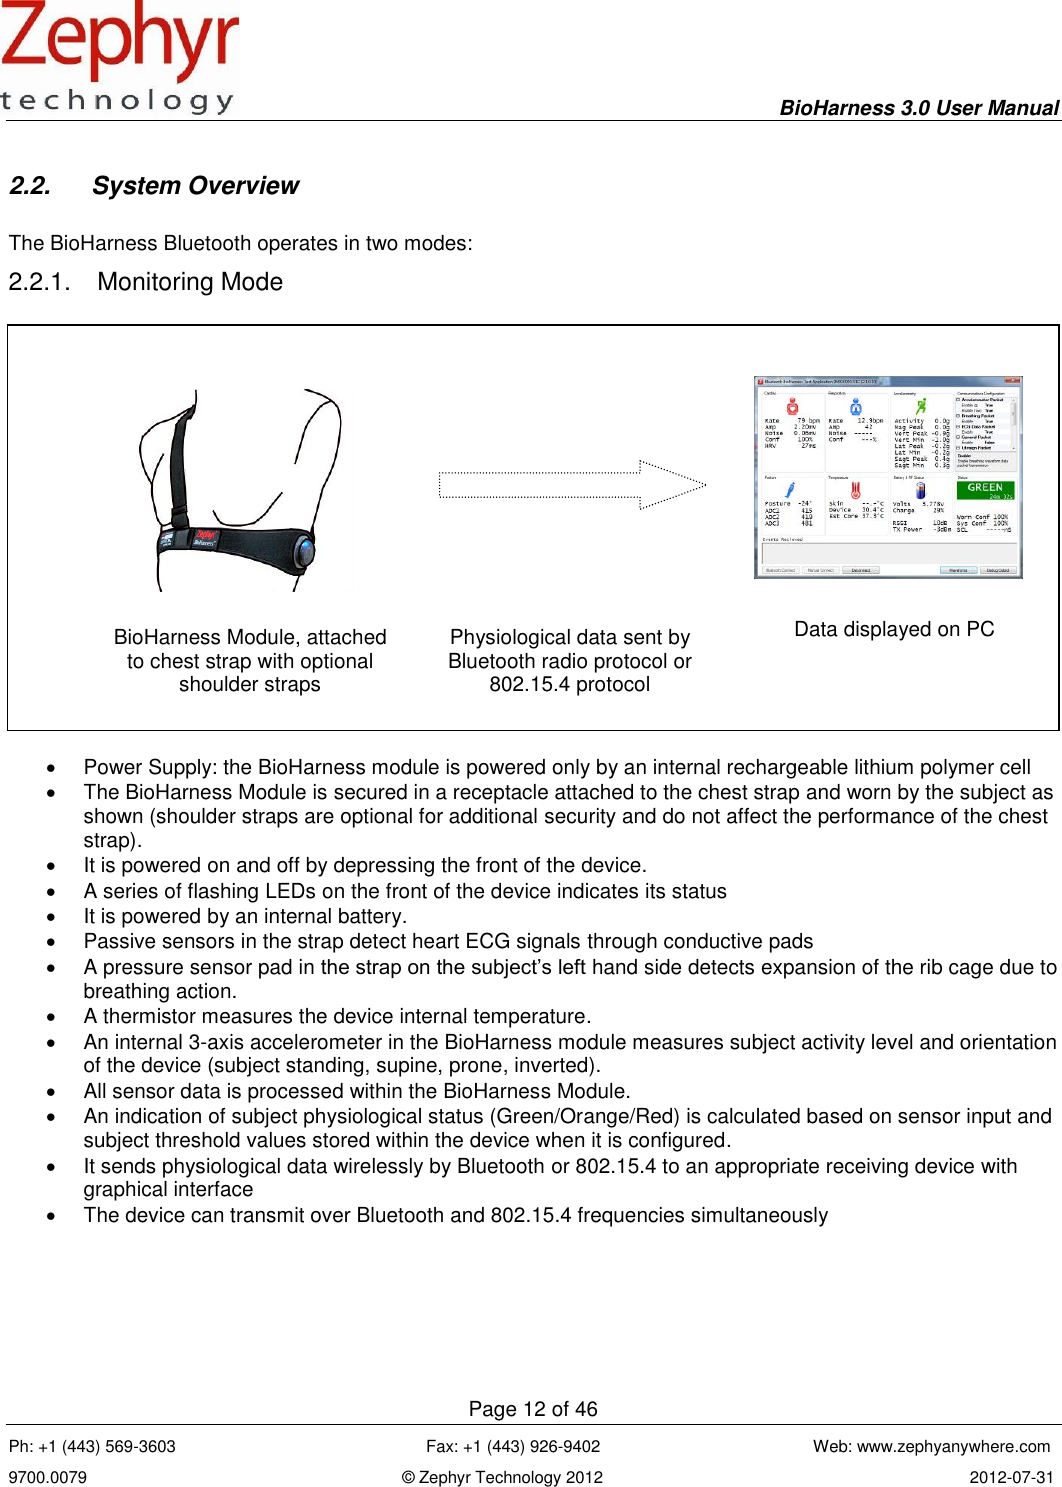     BioHarness 3.0 User Manual  Page 12 of 46 Ph: +1 (443) 569-3603                                                      Fax: +1 (443) 926-9402                                              Web: www.zephyanywhere.com 9700.0079                                                                    © Zephyr Technology 2012                                                                               2012-07-31                                                                                                                                      2.2.  System Overview  The BioHarness Bluetooth operates in two modes: 2.2.1.  Monitoring Mode      Power Supply: the BioHarness module is powered only by an internal rechargeable lithium polymer cell   The BioHarness Module is secured in a receptacle attached to the chest strap and worn by the subject as shown (shoulder straps are optional for additional security and do not affect the performance of the chest strap).    It is powered on and off by depressing the front of the device.  A series of flashing LEDs on the front of the device indicates its status   It is powered by an internal battery.   Passive sensors in the strap detect heart ECG signals through conductive pads   A pressure sensor pad in the strap on the subject’s left hand side detects expansion of the rib cage due to breathing action.   A thermistor measures the device internal temperature.   An internal 3-axis accelerometer in the BioHarness module measures subject activity level and orientation of the device (subject standing, supine, prone, inverted).   All sensor data is processed within the BioHarness Module.   An indication of subject physiological status (Green/Orange/Red) is calculated based on sensor input and subject threshold values stored within the device when it is configured.   It sends physiological data wirelessly by Bluetooth or 802.15.4 to an appropriate receiving device with graphical interface   The device can transmit over Bluetooth and 802.15.4 frequencies simultaneously   BioHarness Module, attached to chest strap with optional shoulder straps Physiological data sent by Bluetooth radio protocol or 802.15.4 protocol Data displayed on PC New label graphic TBD 